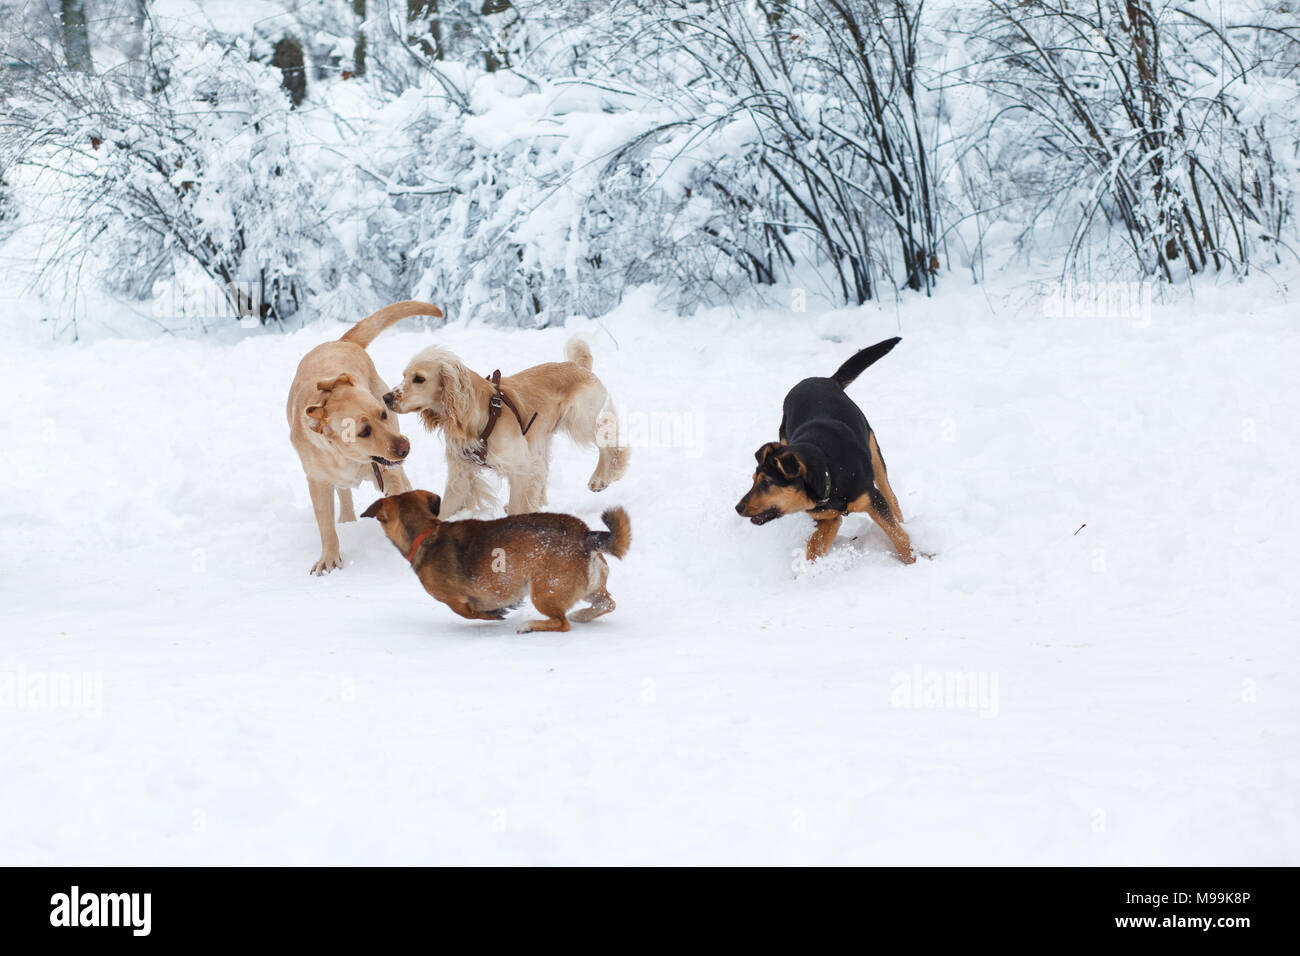 Dogs Playing In Snow Winter Dog Walk In The Park Stock Photo Alamy